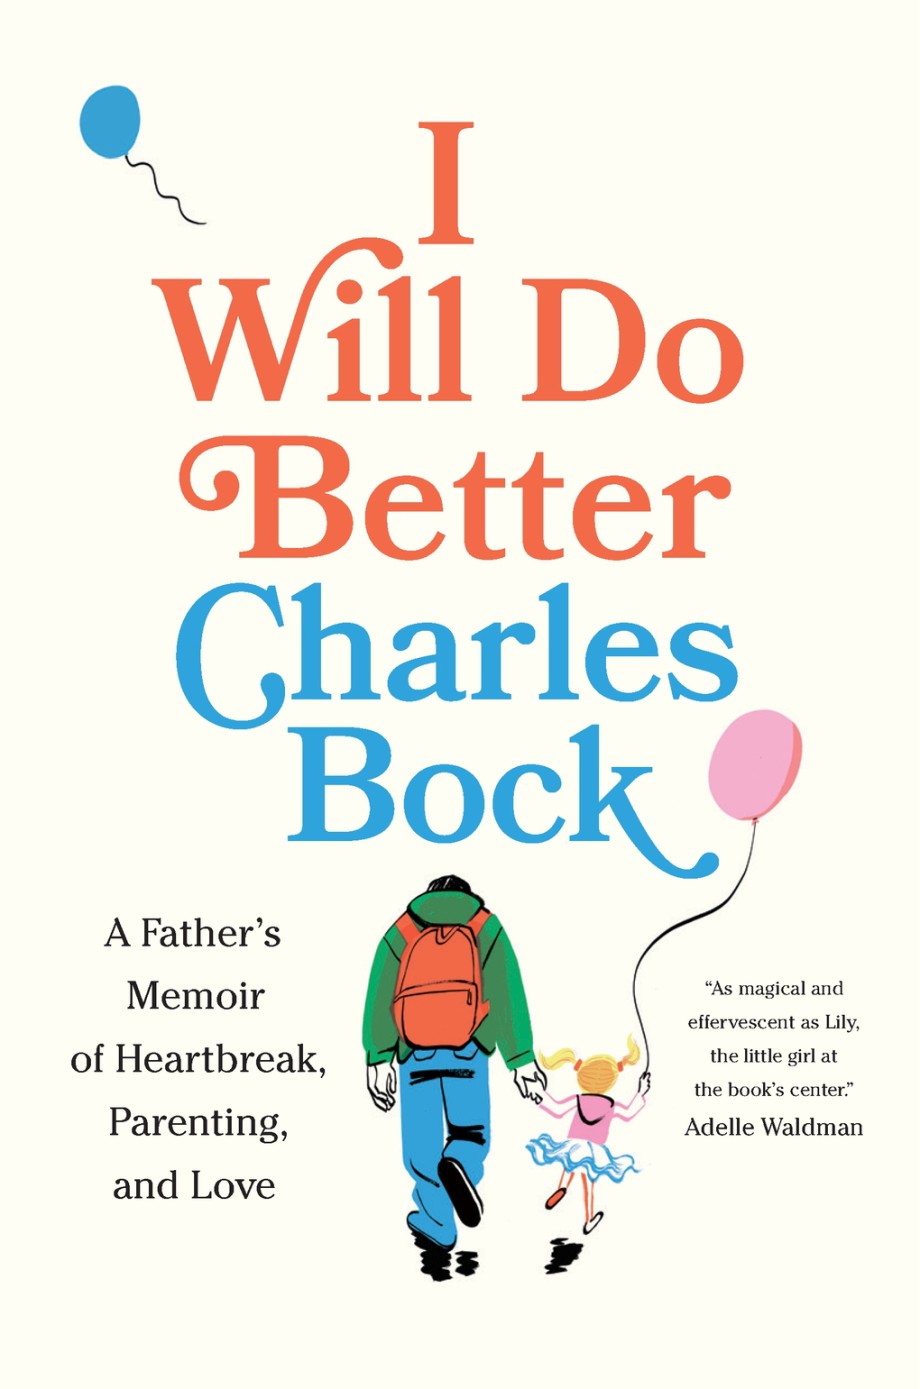 I Will Do Better A Father's Memoir of Heartbreak, Parenting, and Love